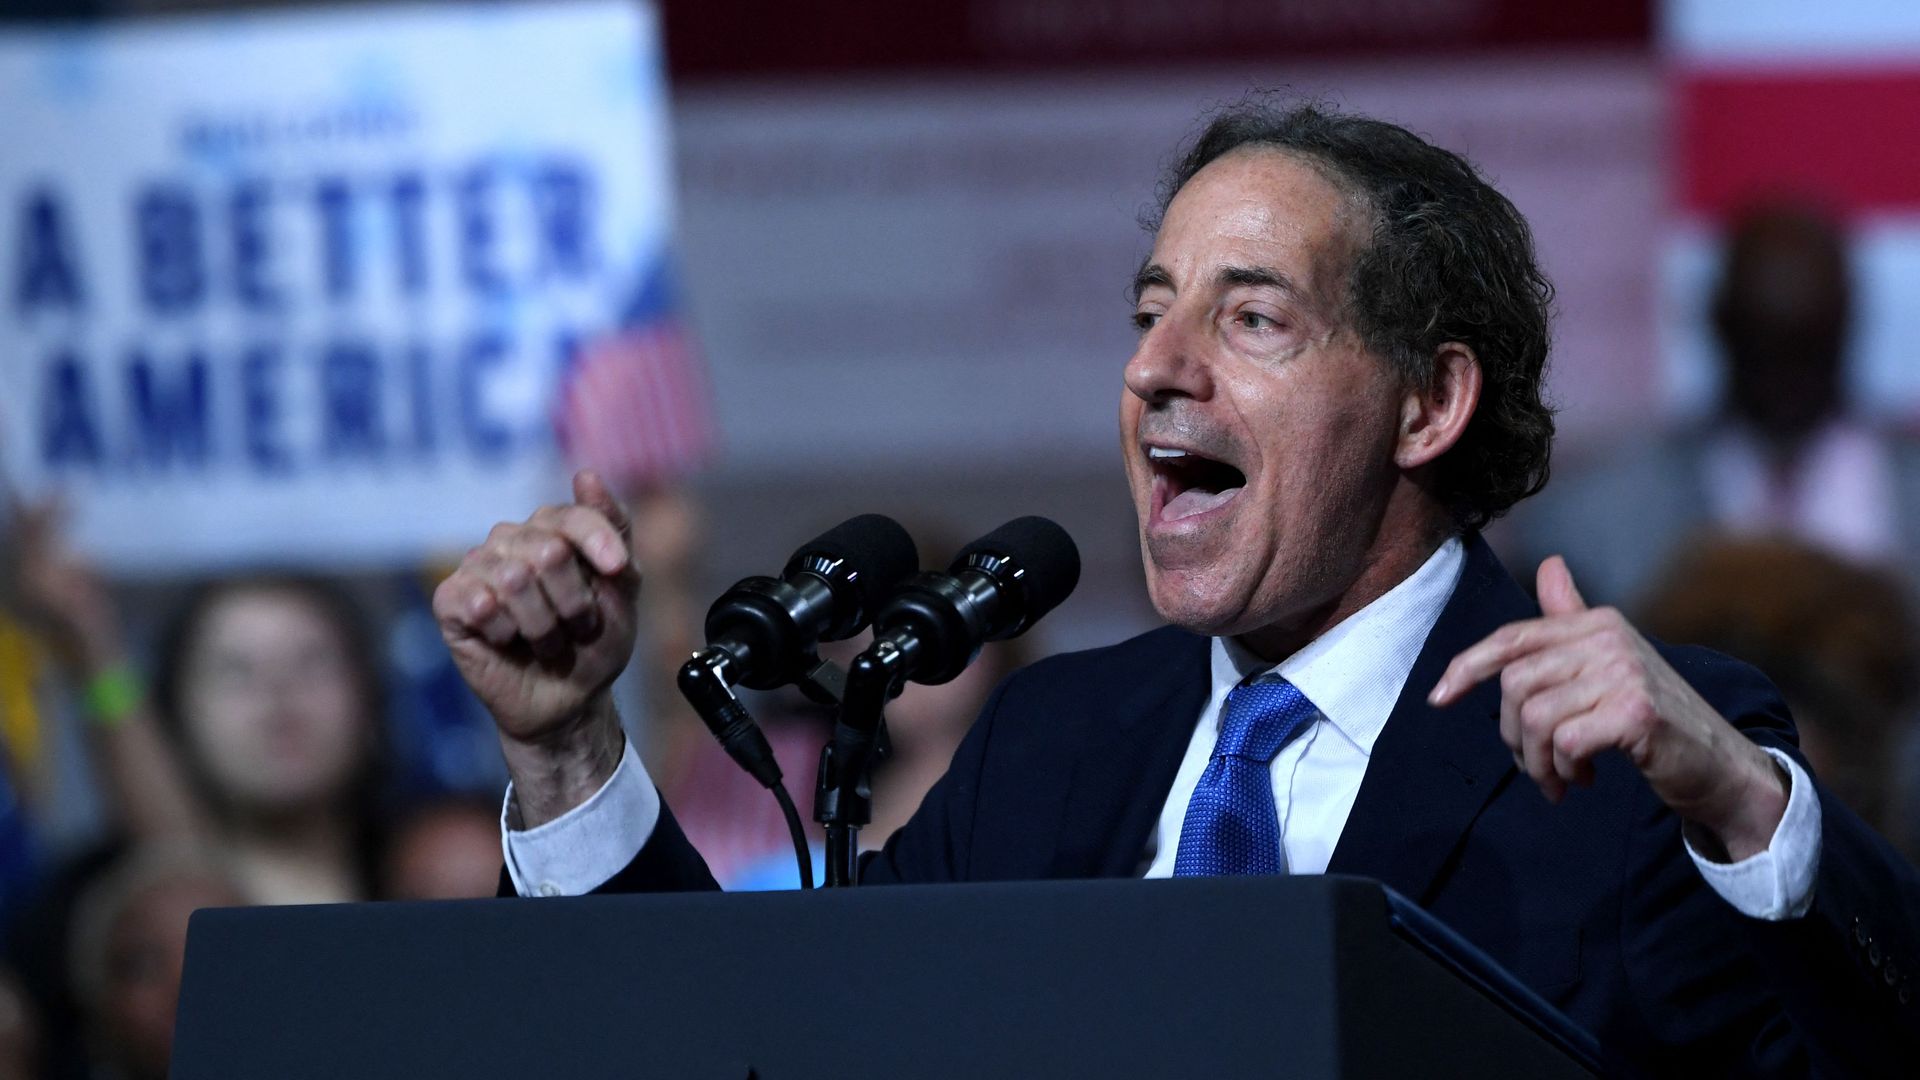 Rep. Jamie Raskin, wearing a dark blue suit, white shirt and blue tie, speaks at a podium during a Biden rally.